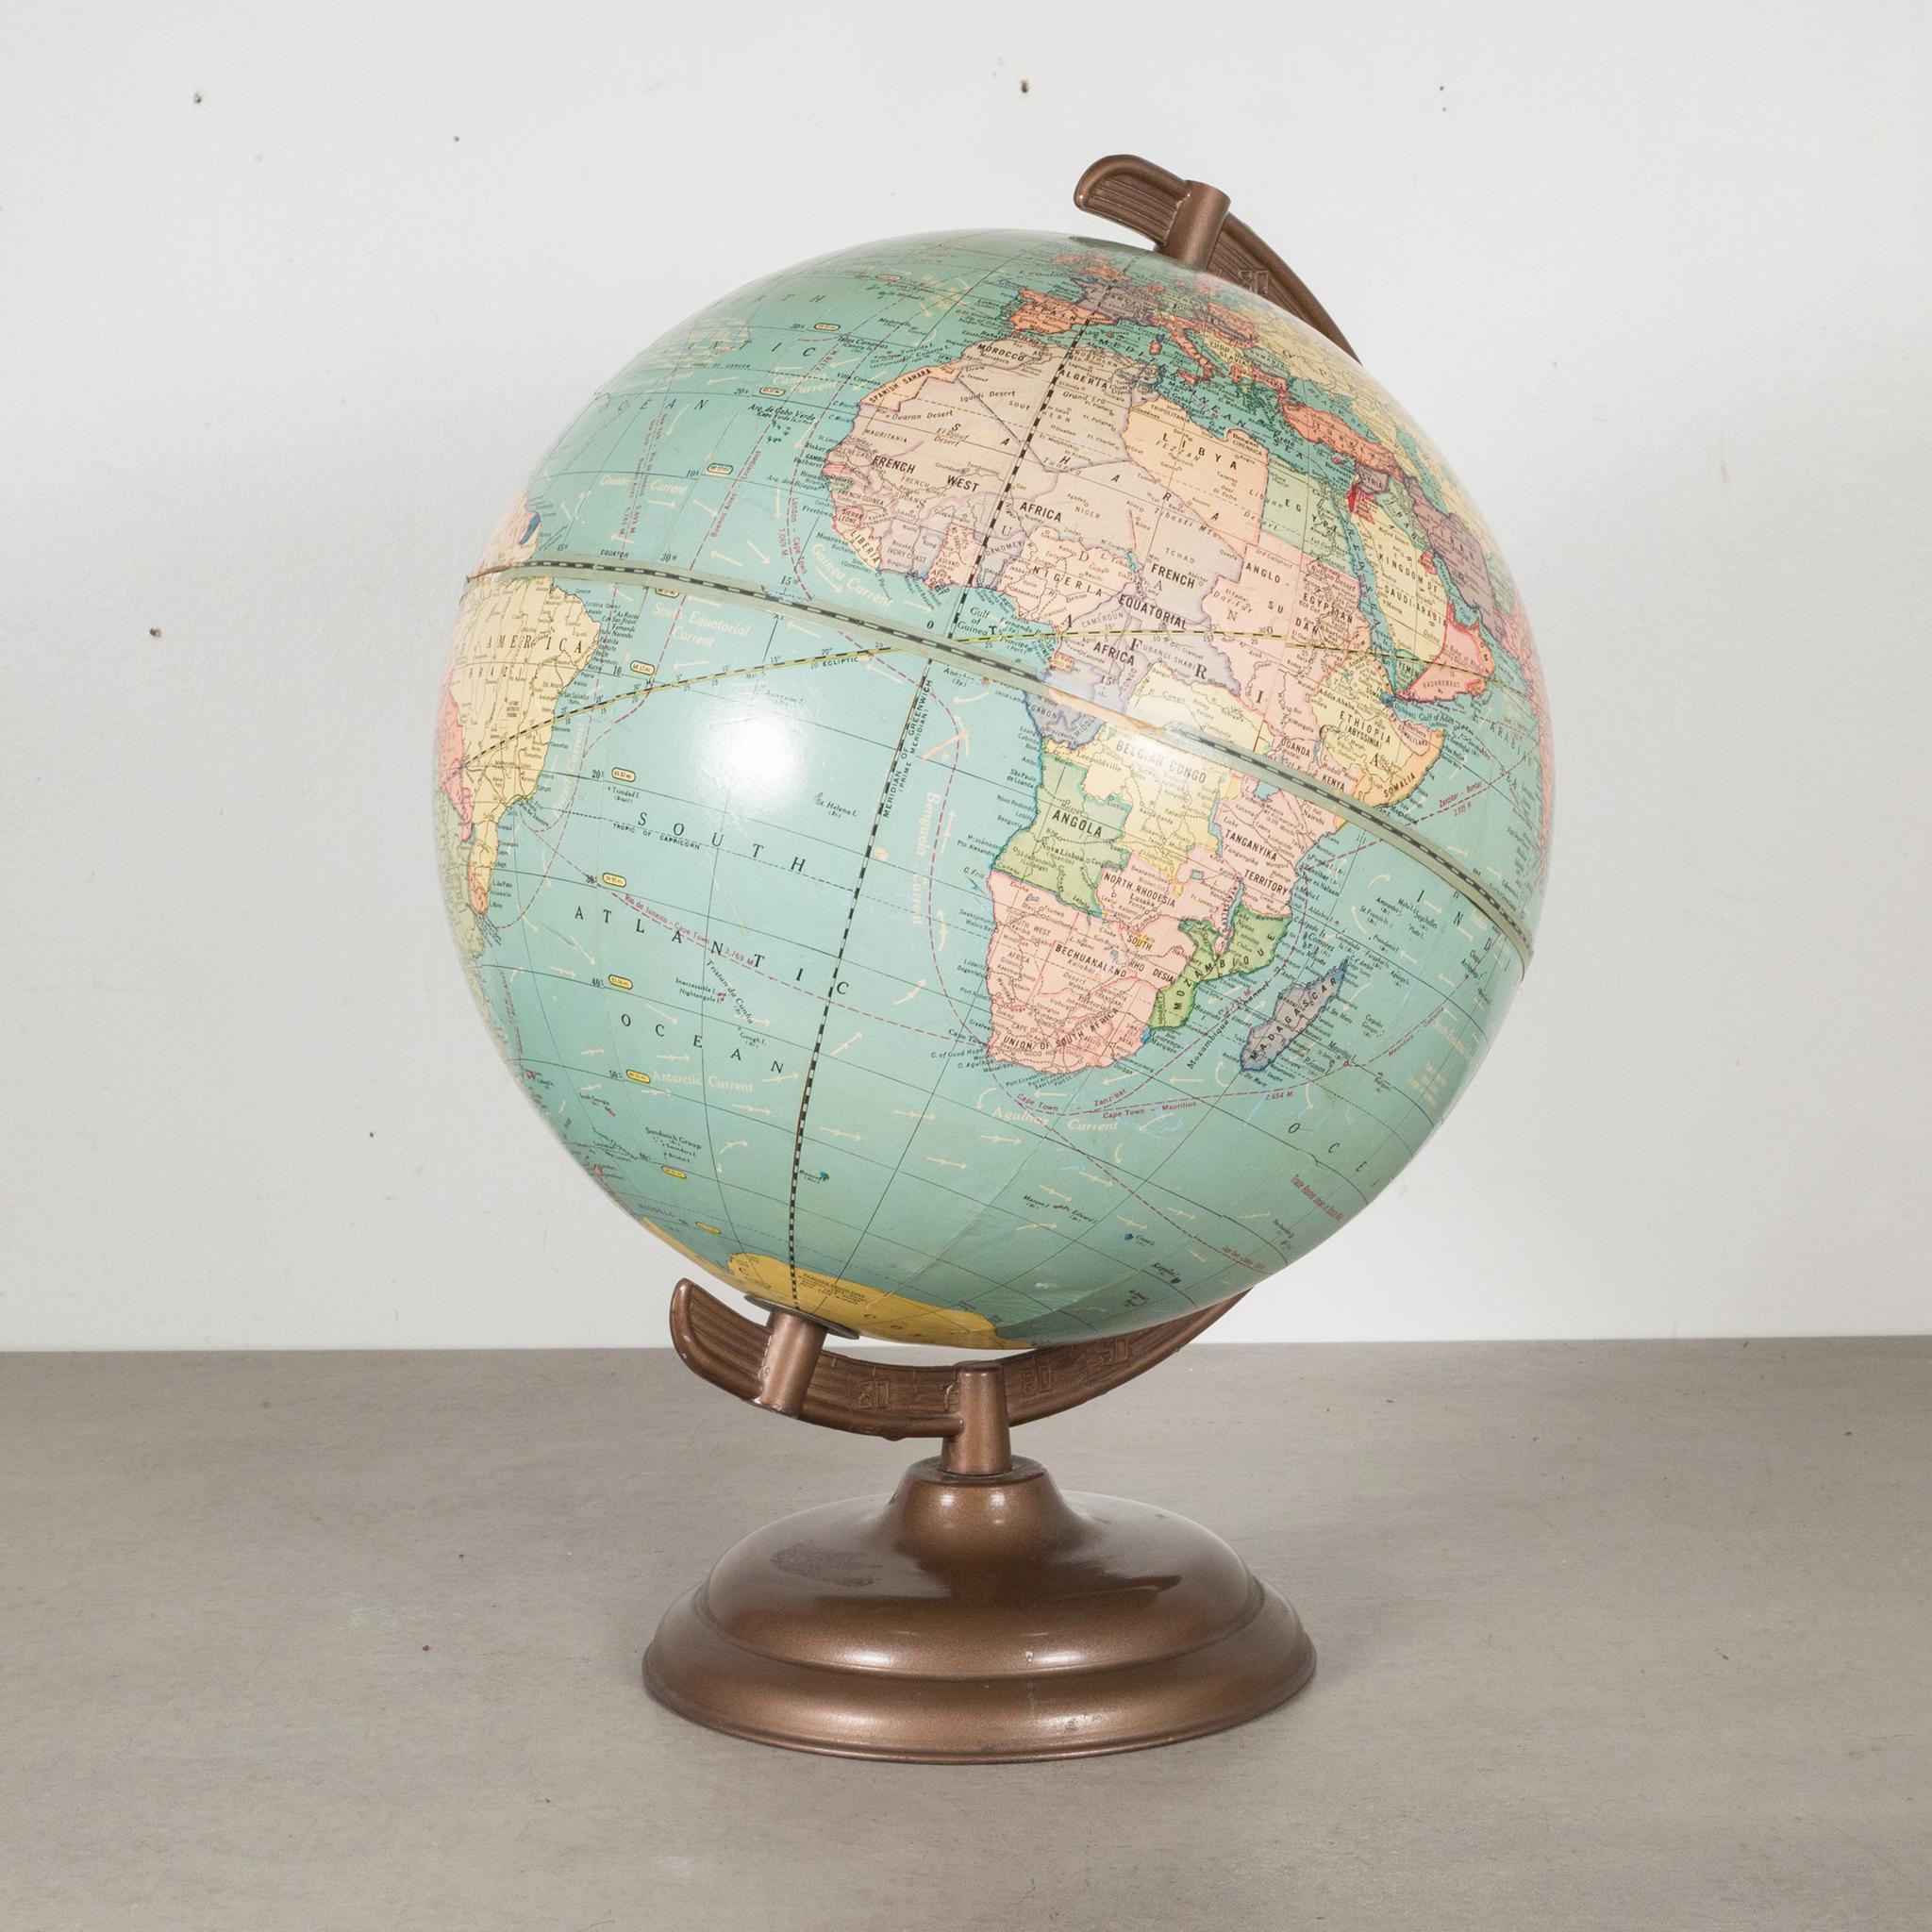 About

This is an original Cram's Universal Globe mounted on a metal pedestal with a metal bracket. This piece has retained its original finish with minor damage.

 Creator George F. Cram Company, Indianapolis, IN.
Date of manufacture: